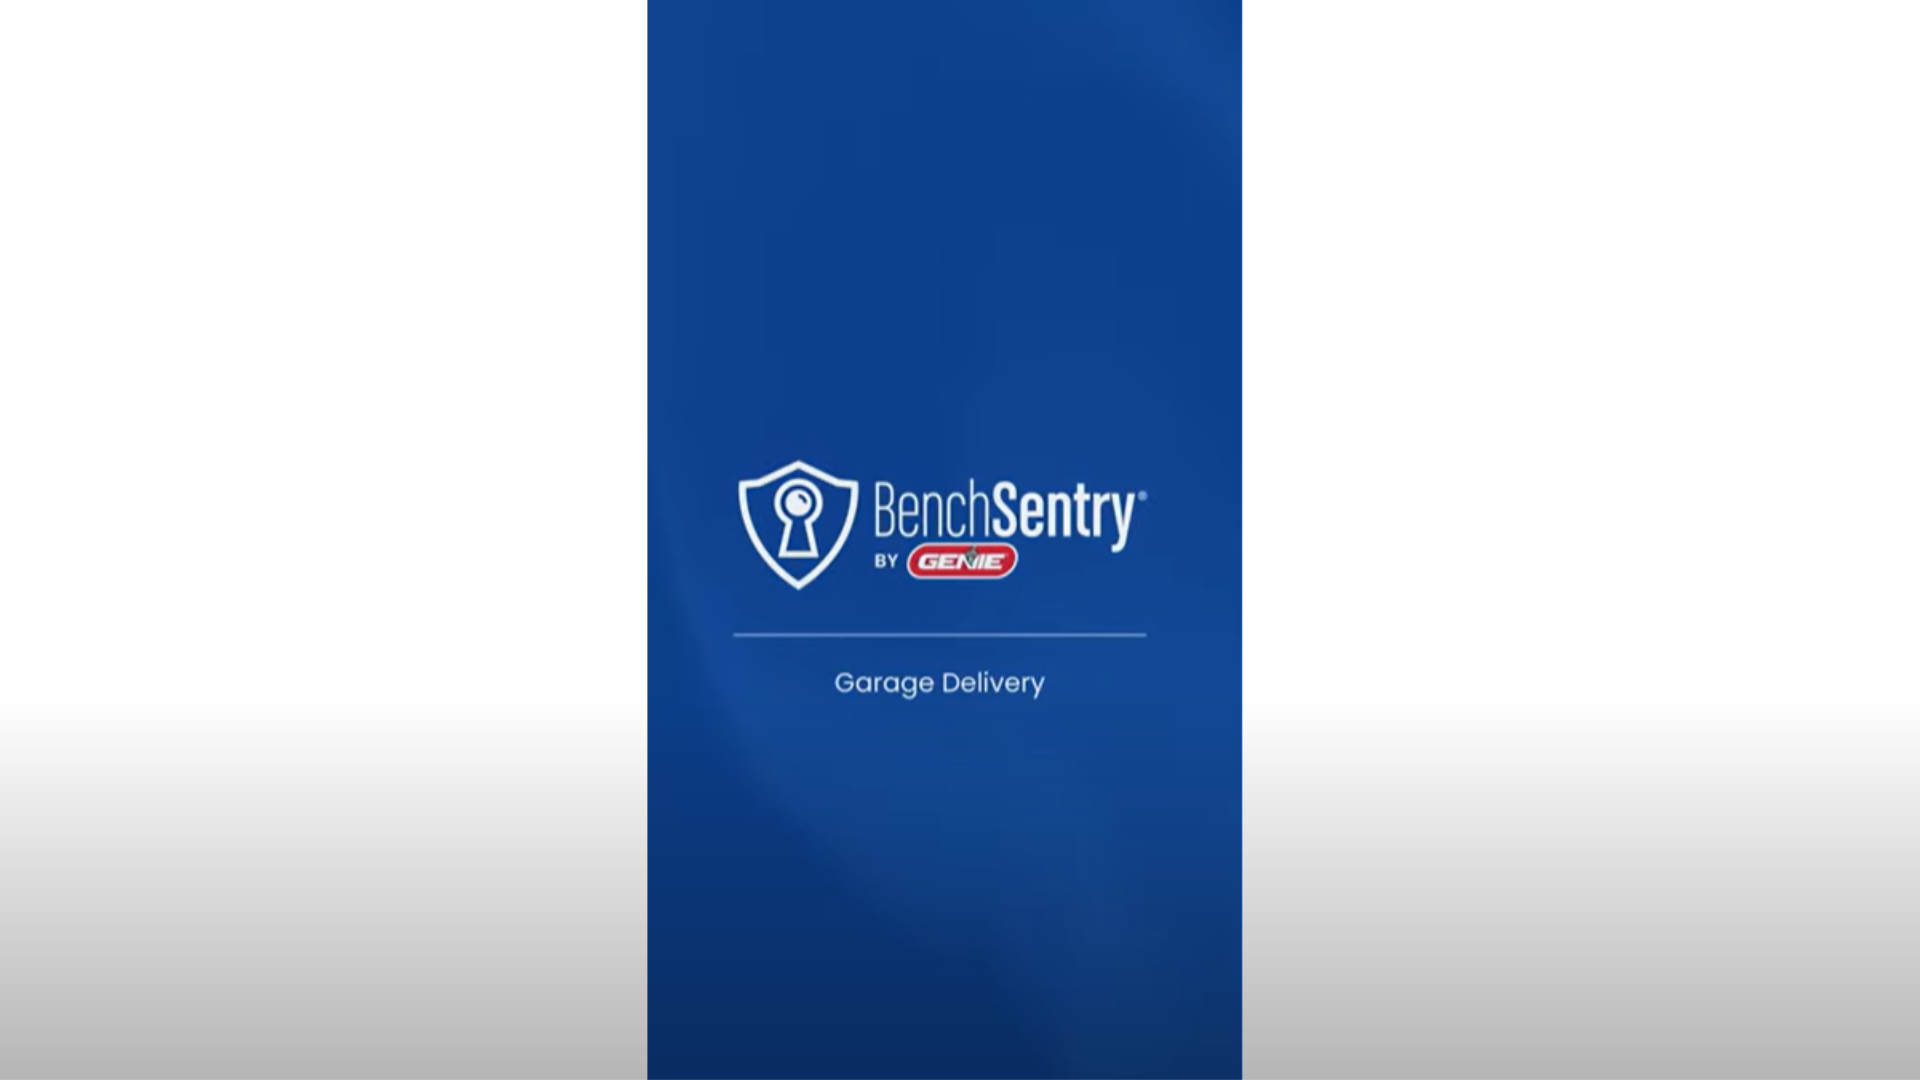 Load video: BenchSentry Garage Delivery